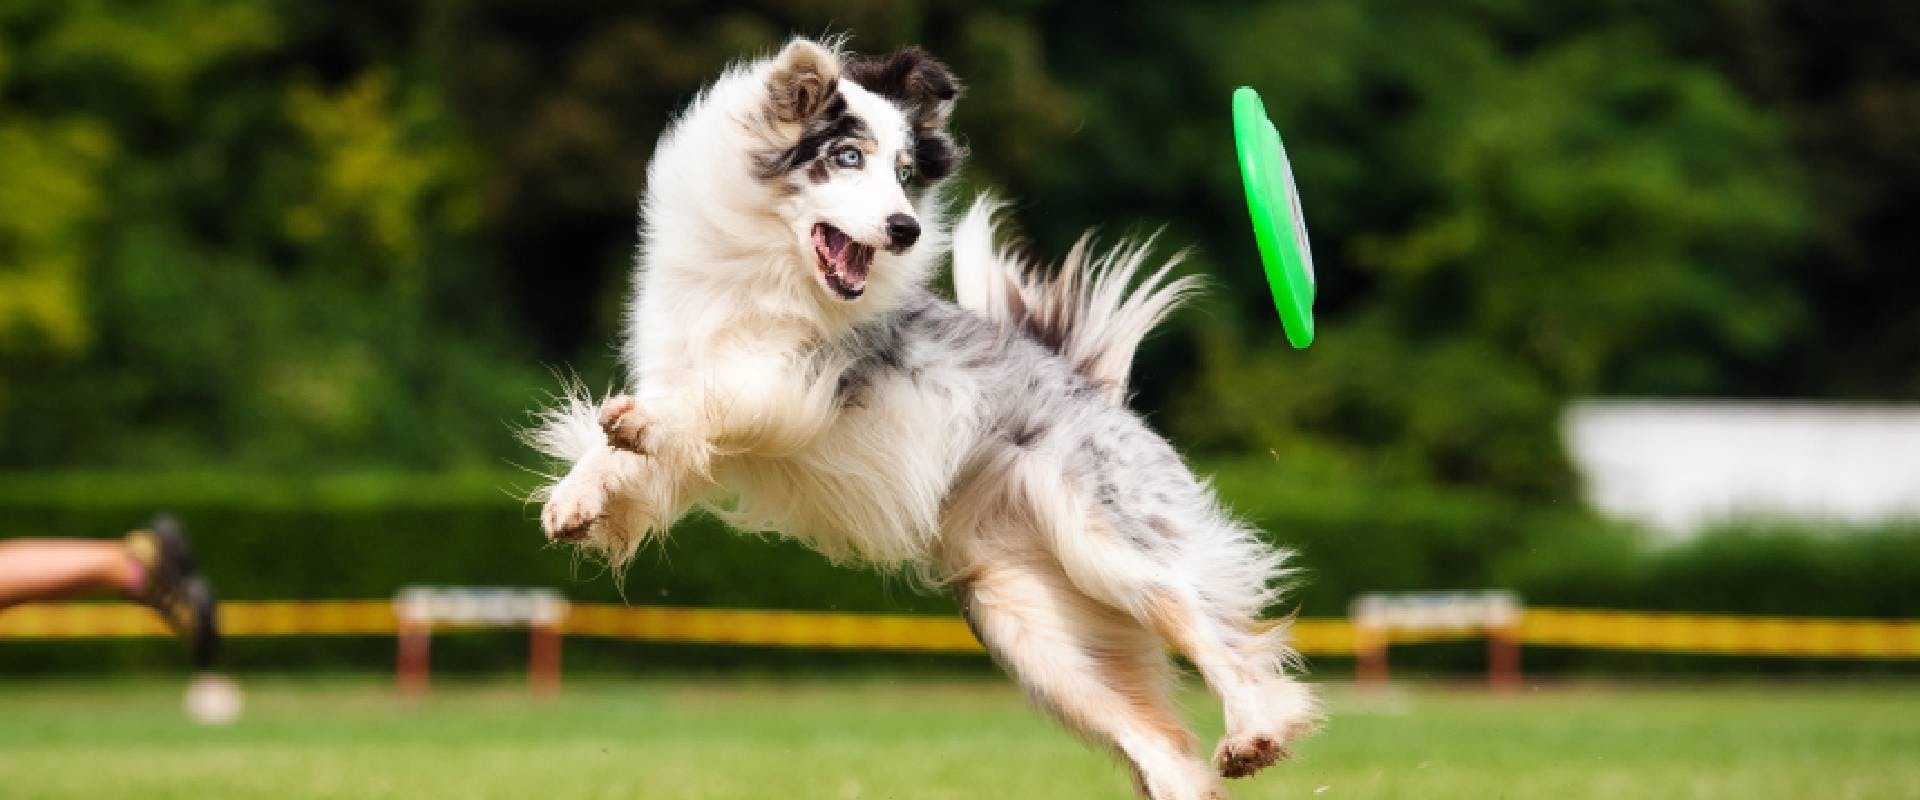 Border Collie chasing a frisbee